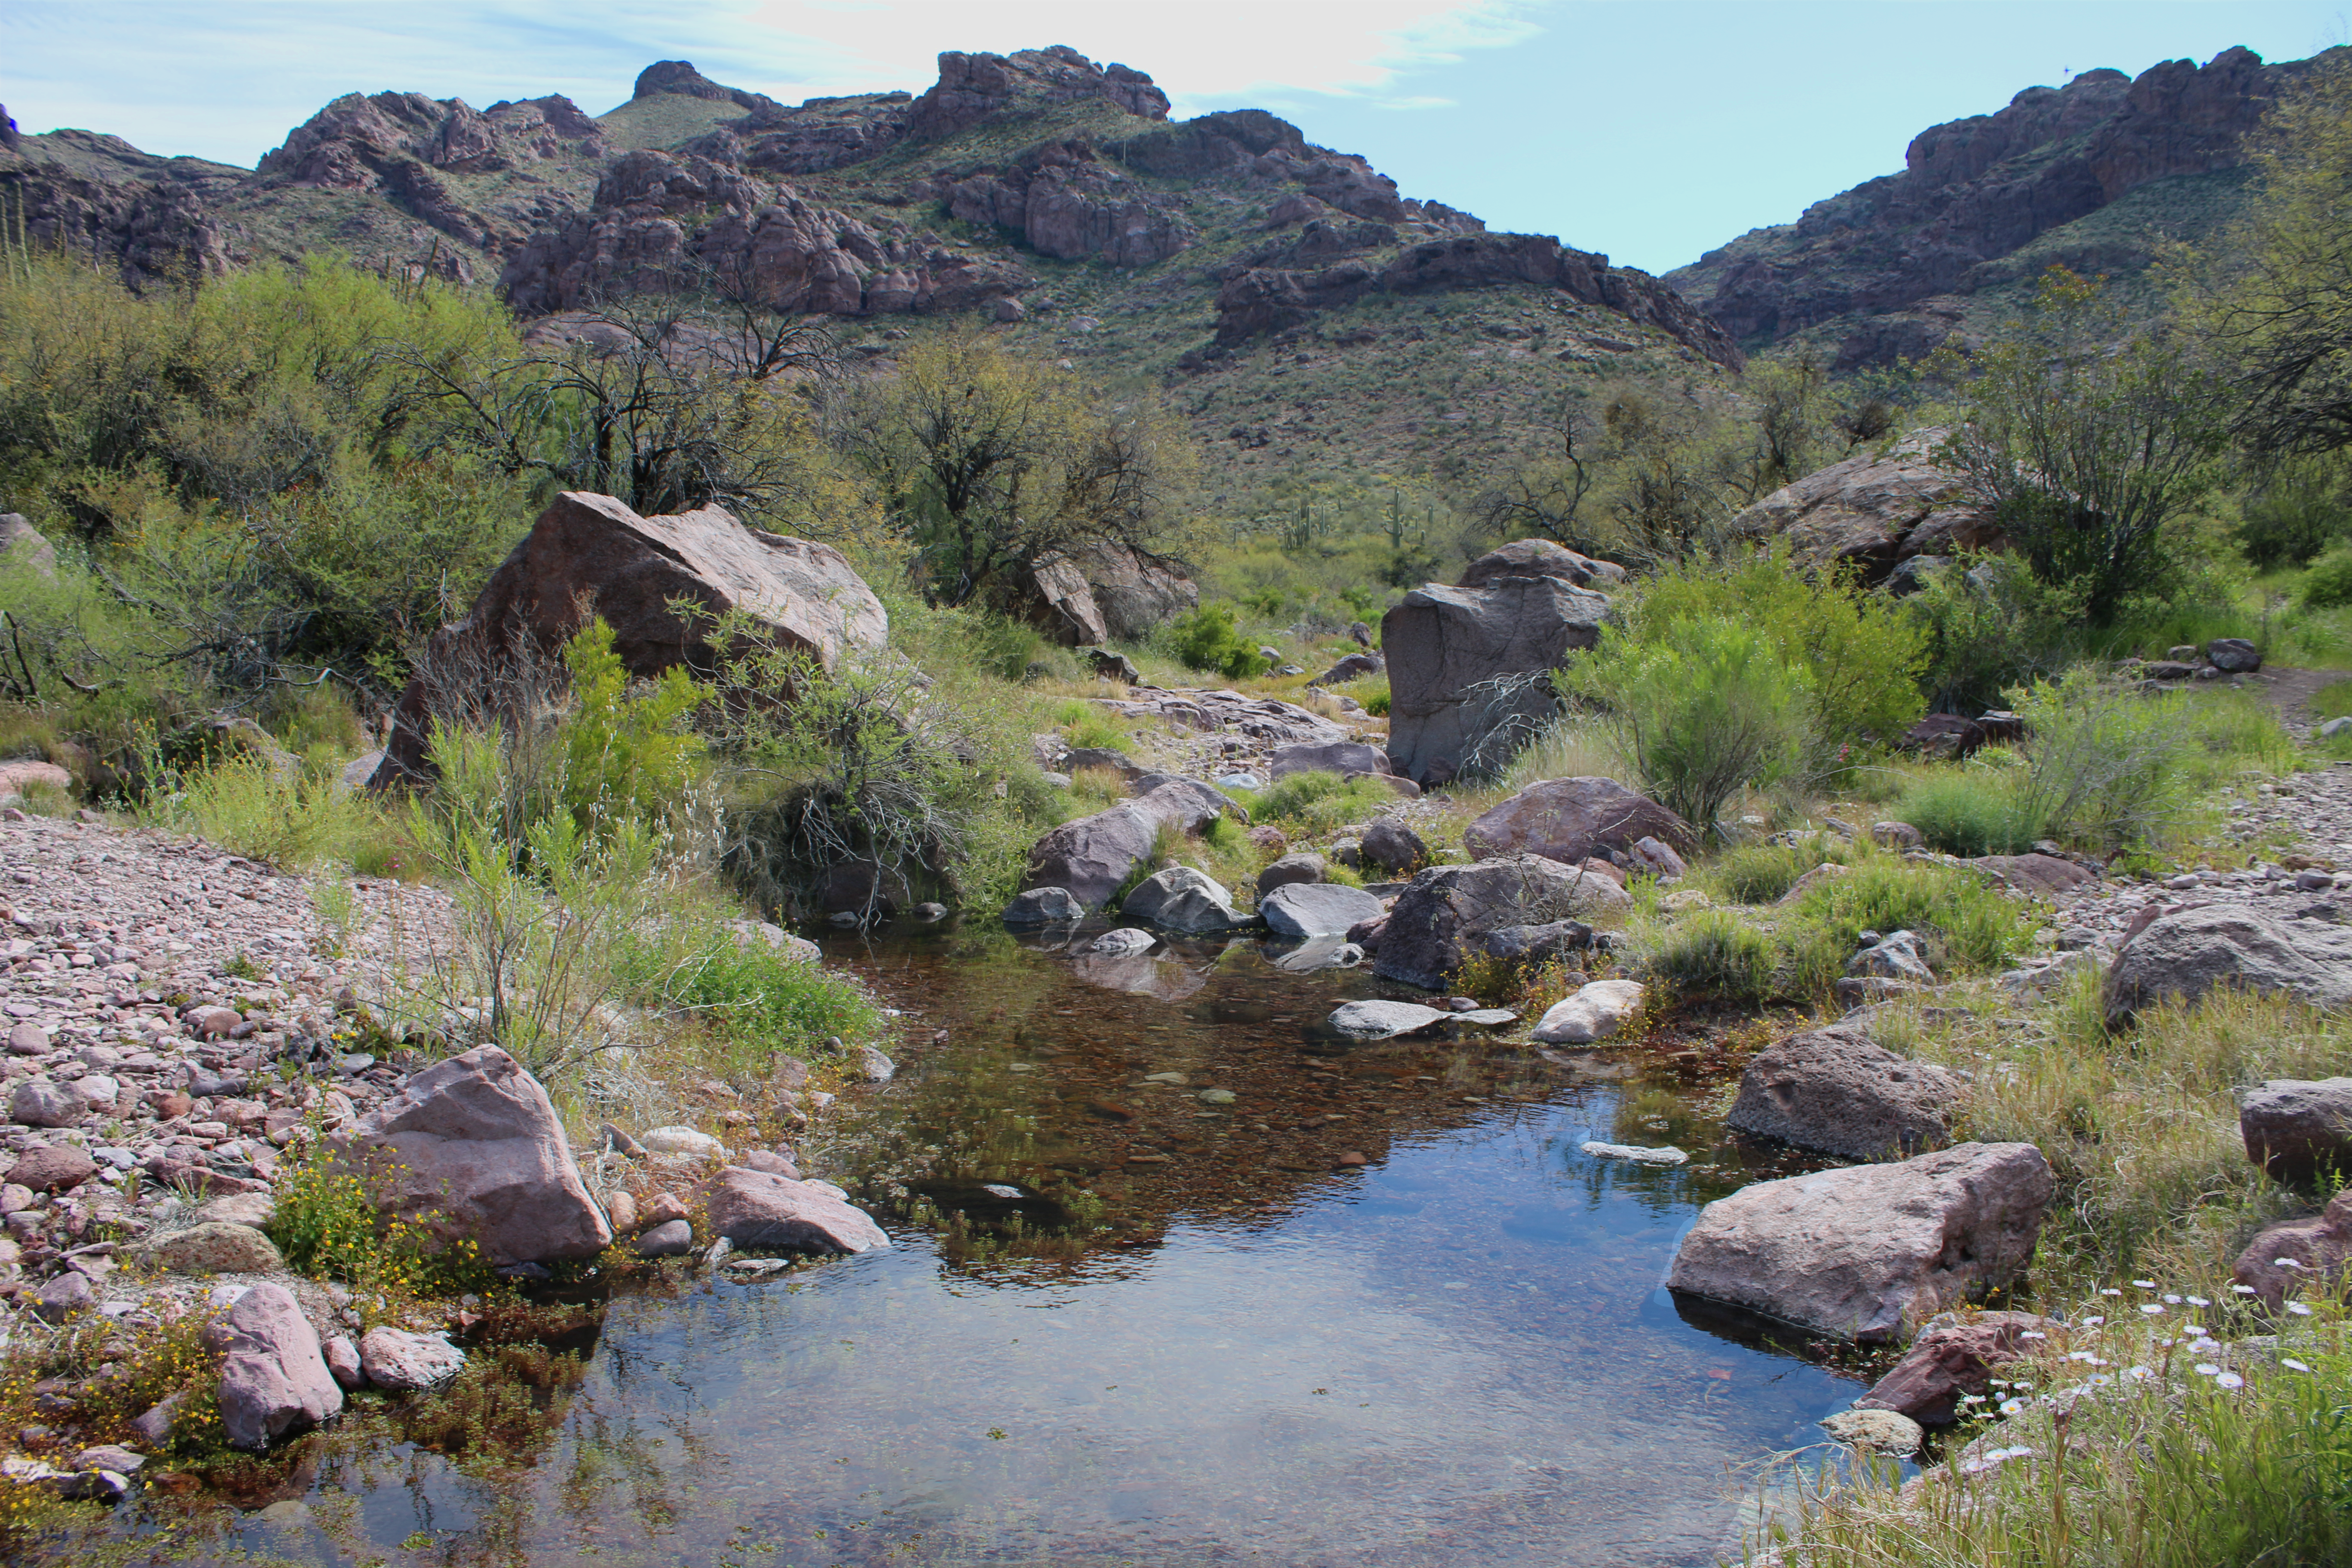 A pool of still water surrounded by large rocks and shrubs. A plant-covered mountain stands in the background. The water reflects the blue sky and some of the mountain.